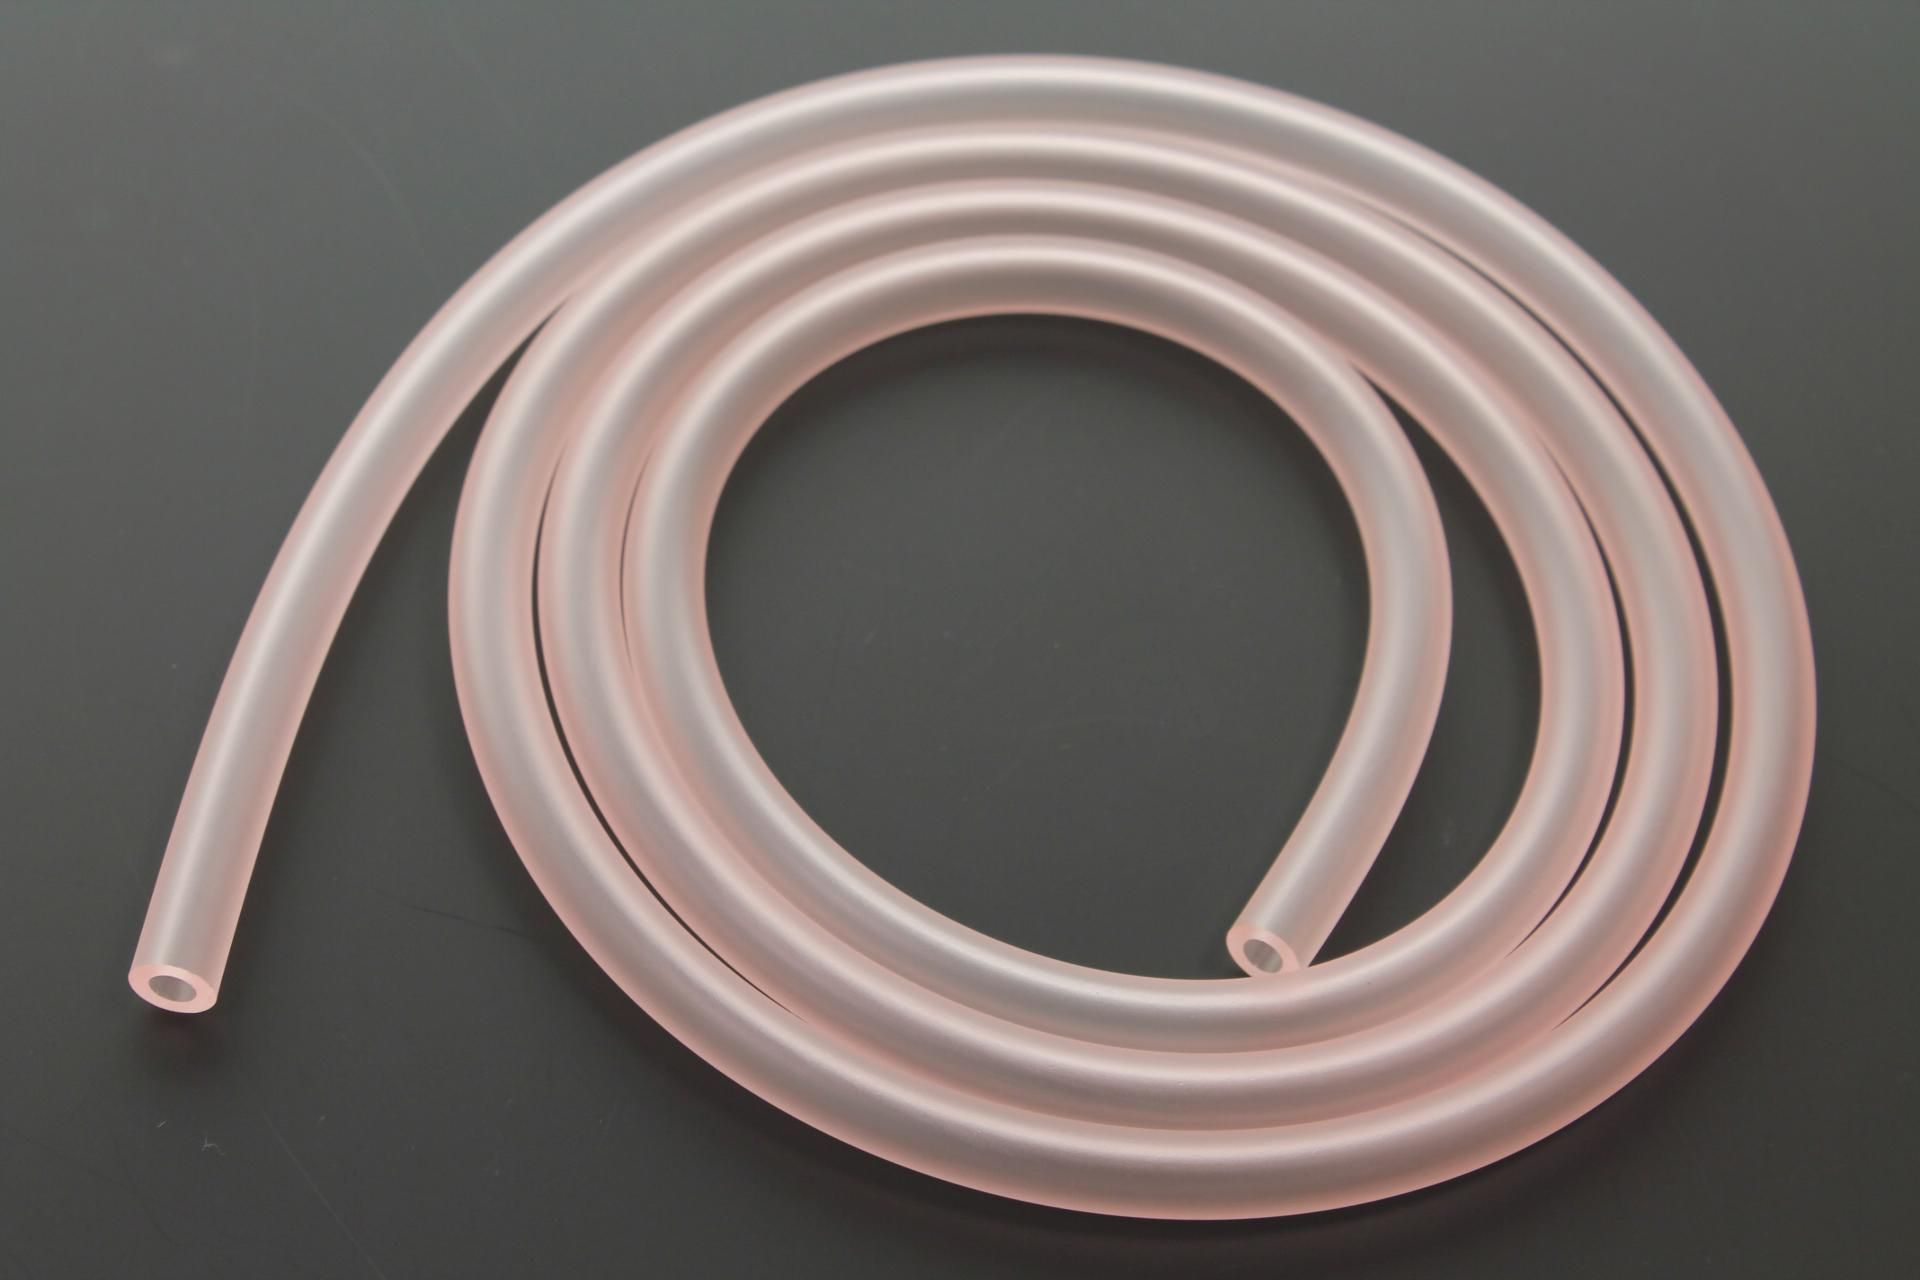 91A20-05115-00 Superseded by 91A20-05145-00 - TUBE, FLEXIBLE